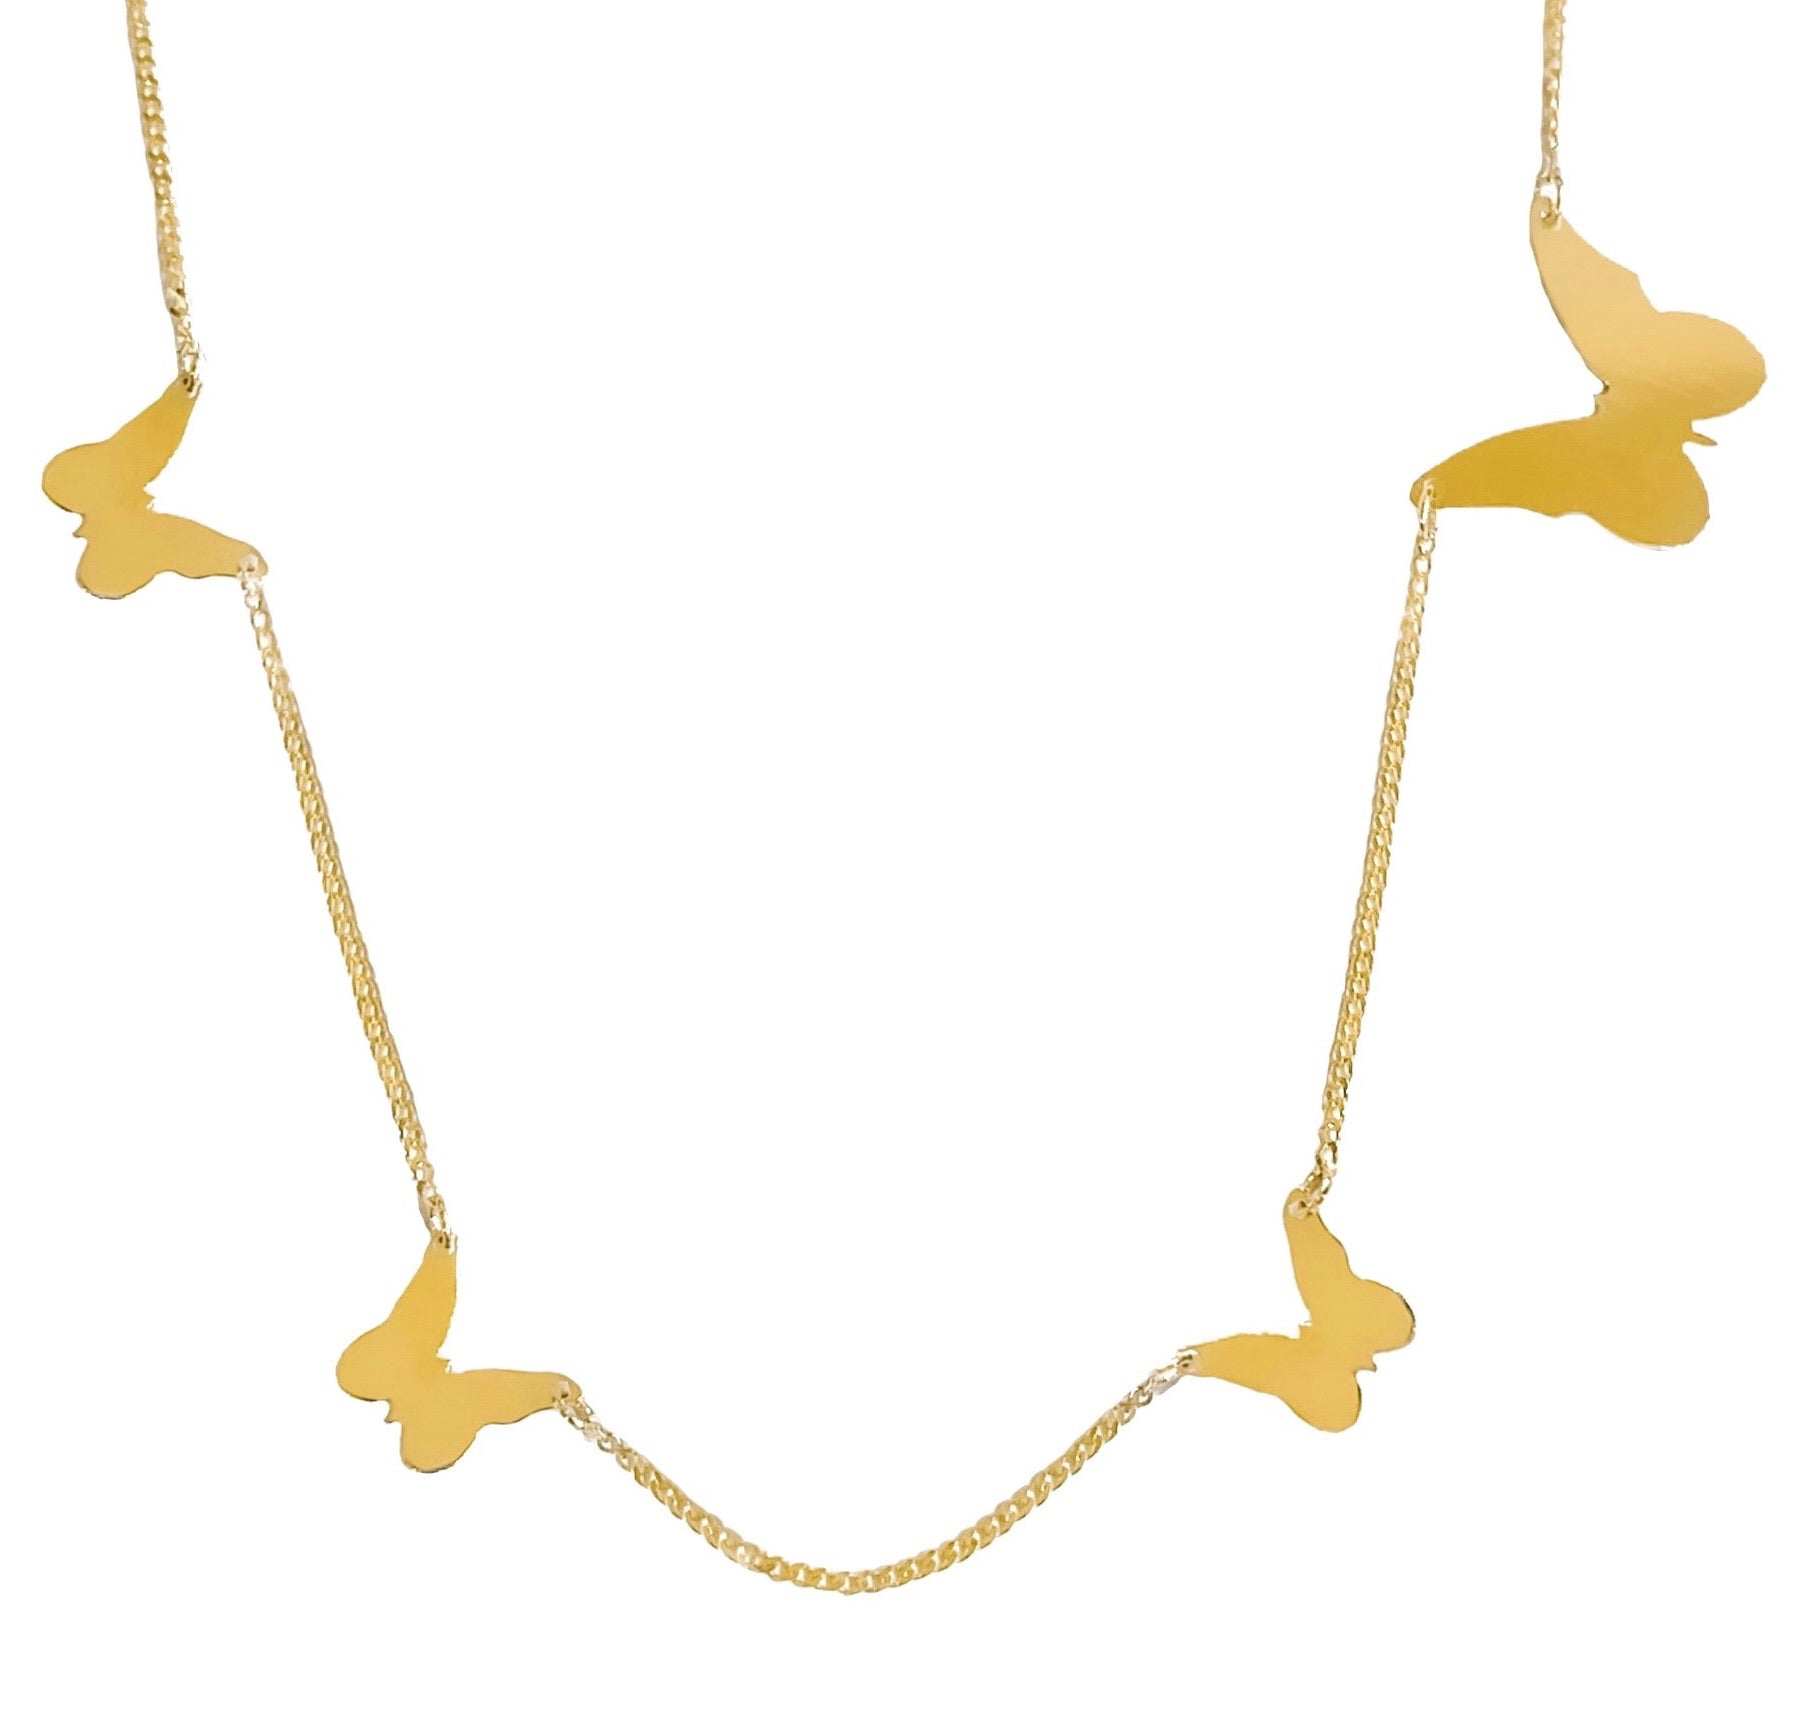 14K YELLOW GOLD BUTTERFLY GARDEN NECKLACE